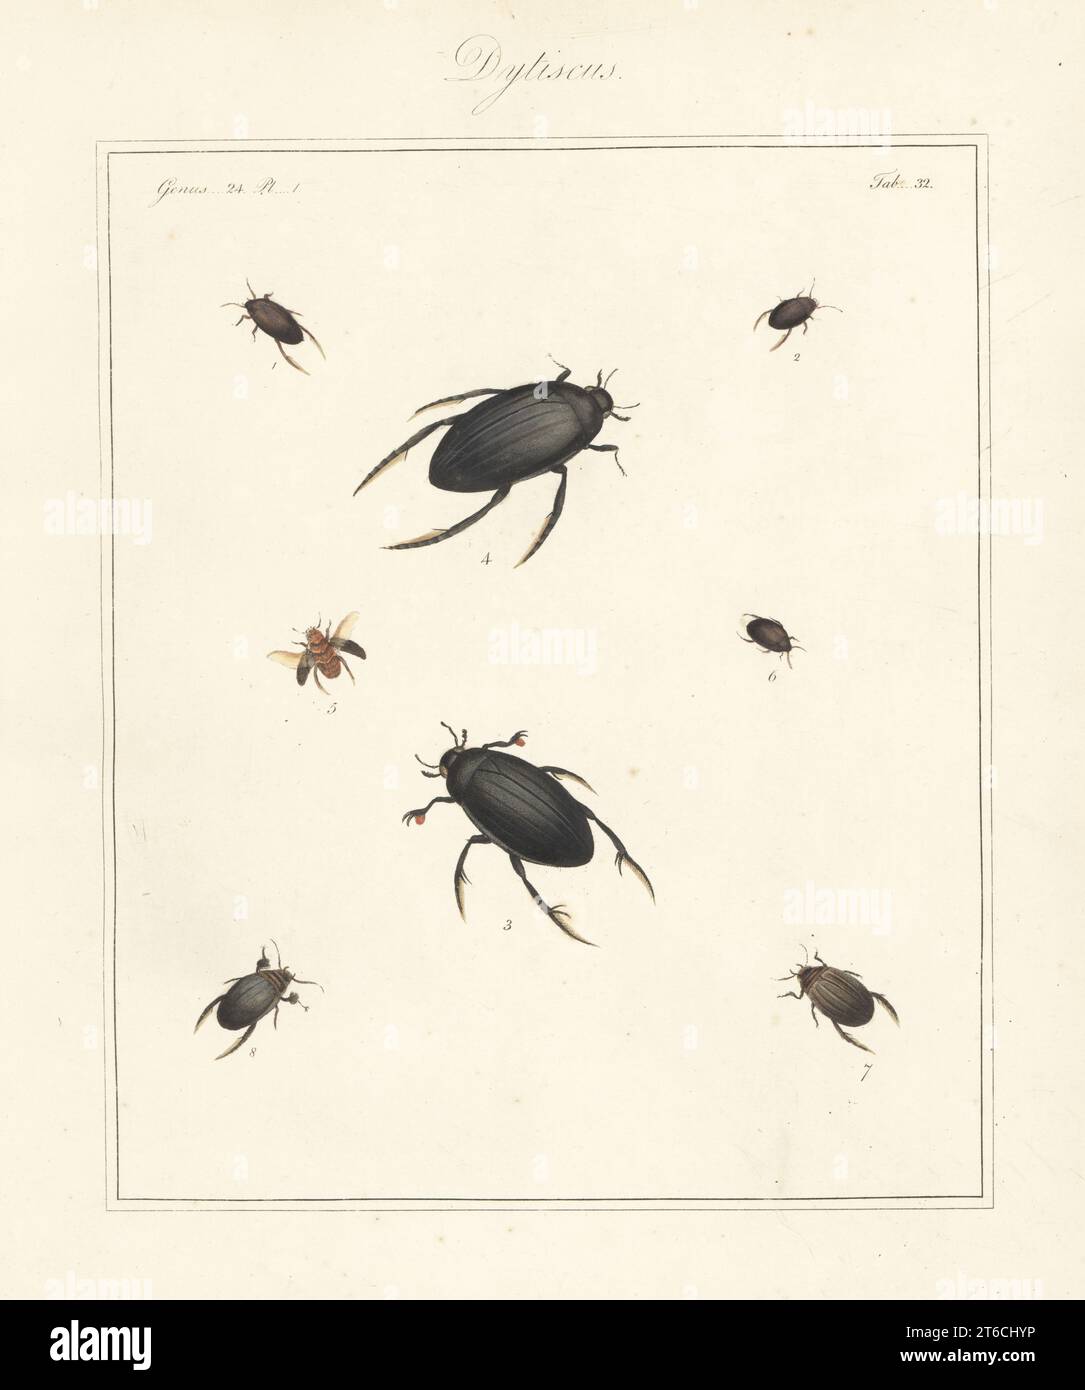 Water beetle, Hydroporus erythrocephalus 1, Agabus uliginosus 2,5, great silver water beetle, Hydrophilus piceus 3,4, Agabus bipustulatus 6, Graphoderus cinereus 7, and Acilius sulcatus 8. Handcoloured copperplate engraving from Thomas Martyns The English Entomologist, Exhibiting all the Coleopterous Insects found in England, Academy for Illustrating and Painting Natural History, London, 1792. Stock Photo